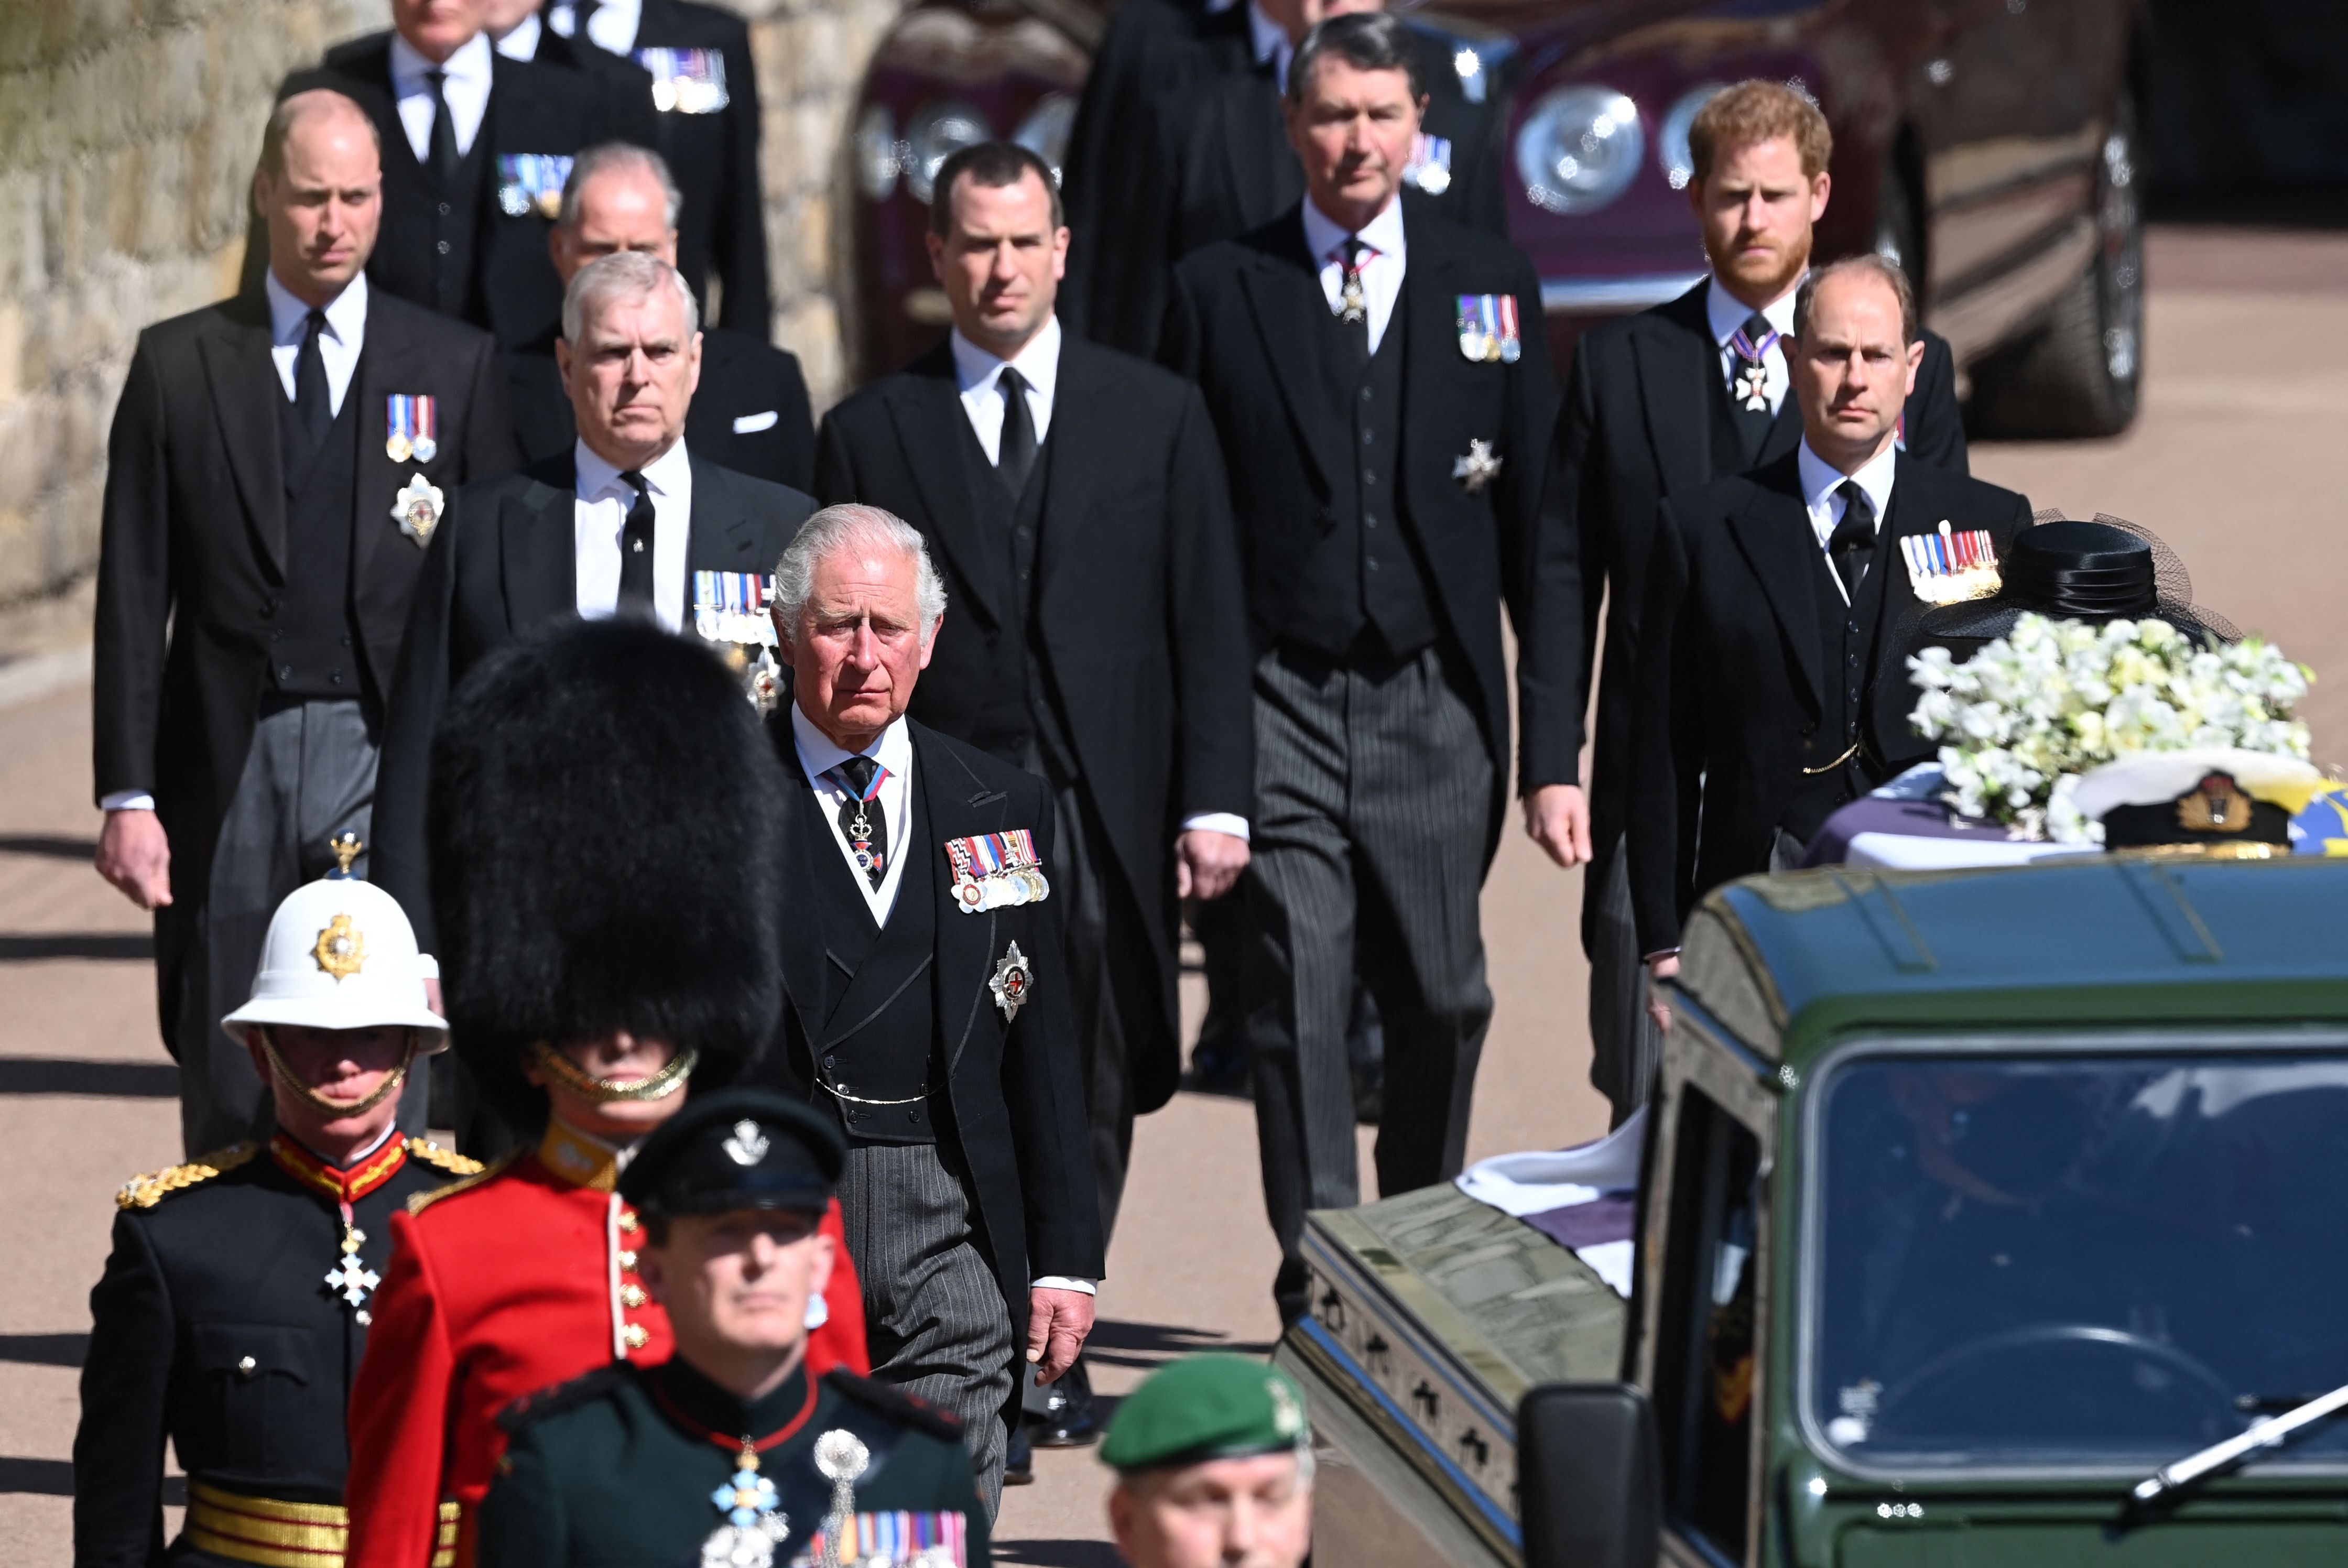 Charles, Prince of Wales and his sons Prince William and Prince Harry walk during the ceremonial funeral procession of Prince Philip on April 17, 2021 | Photo: Getty Images